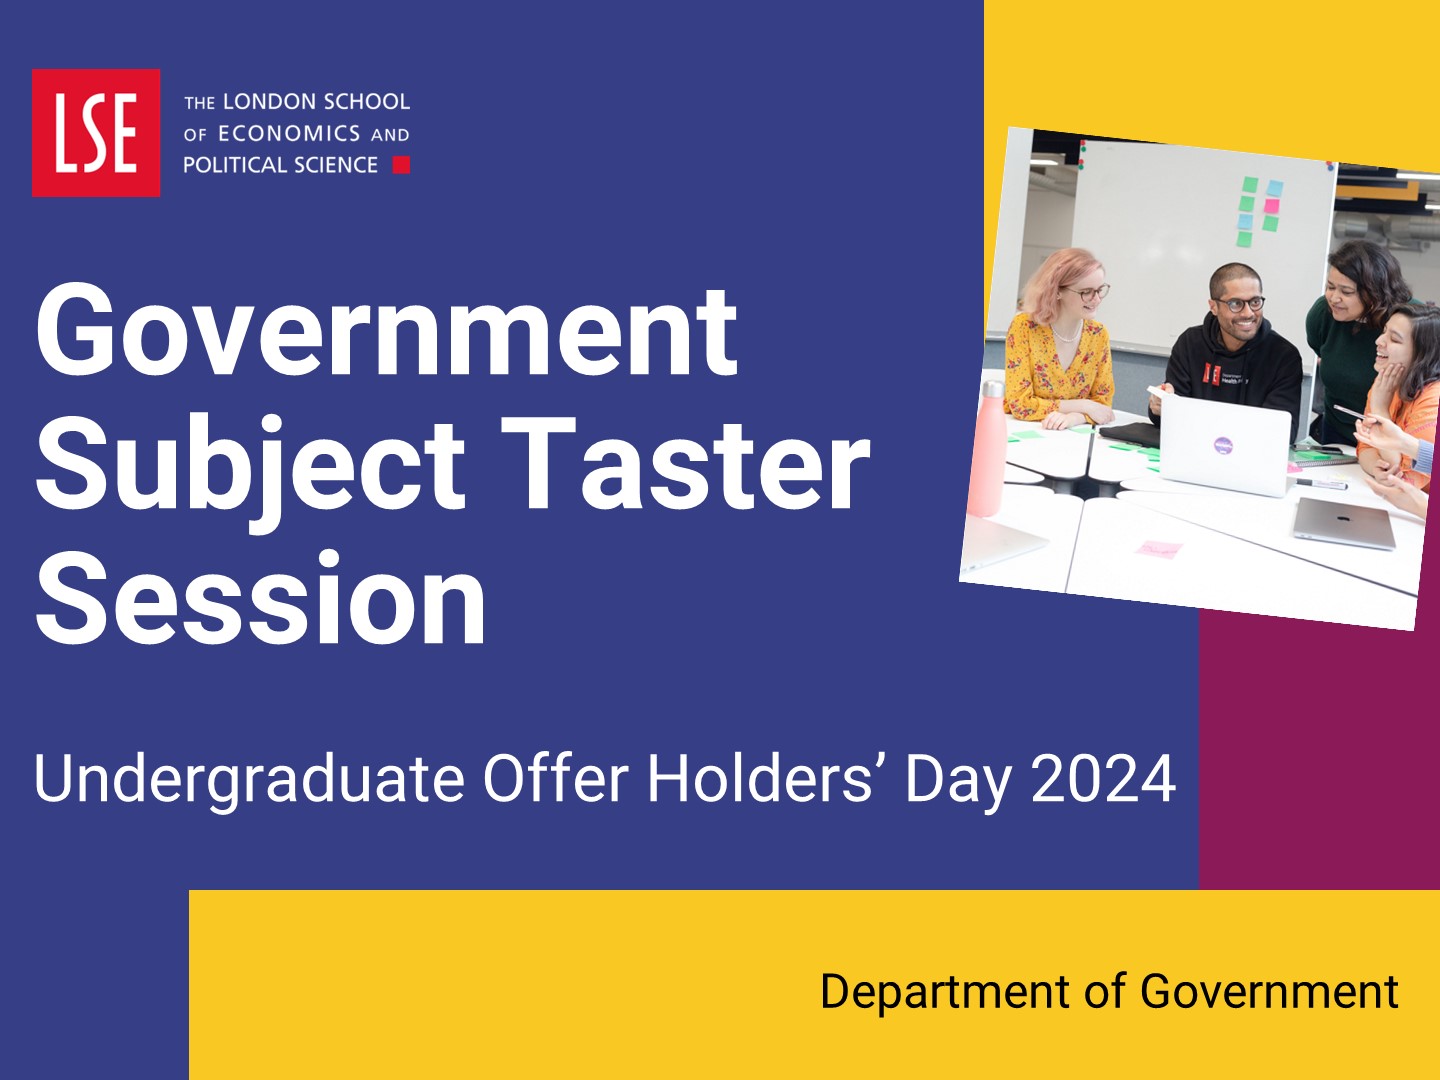 Watch the government subject taster session